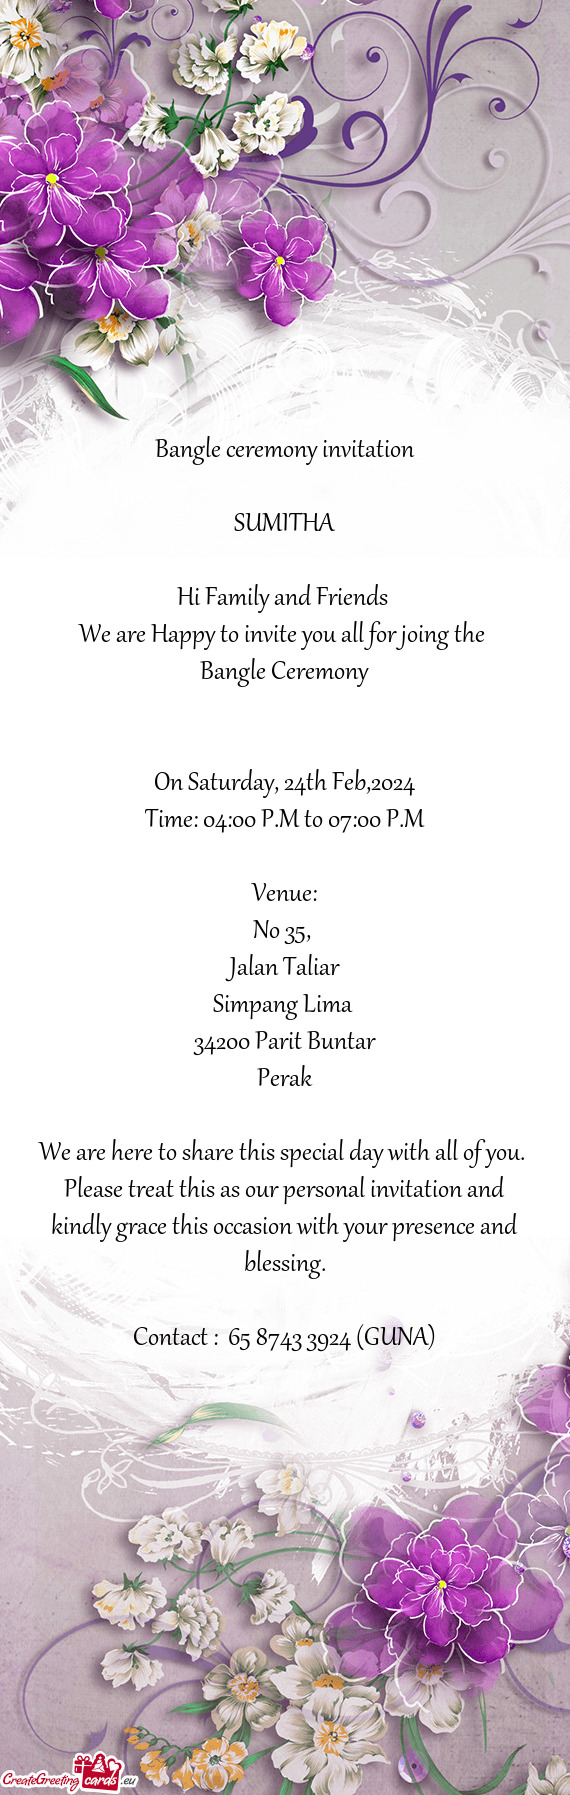 We are Happy to invite you all for joing the